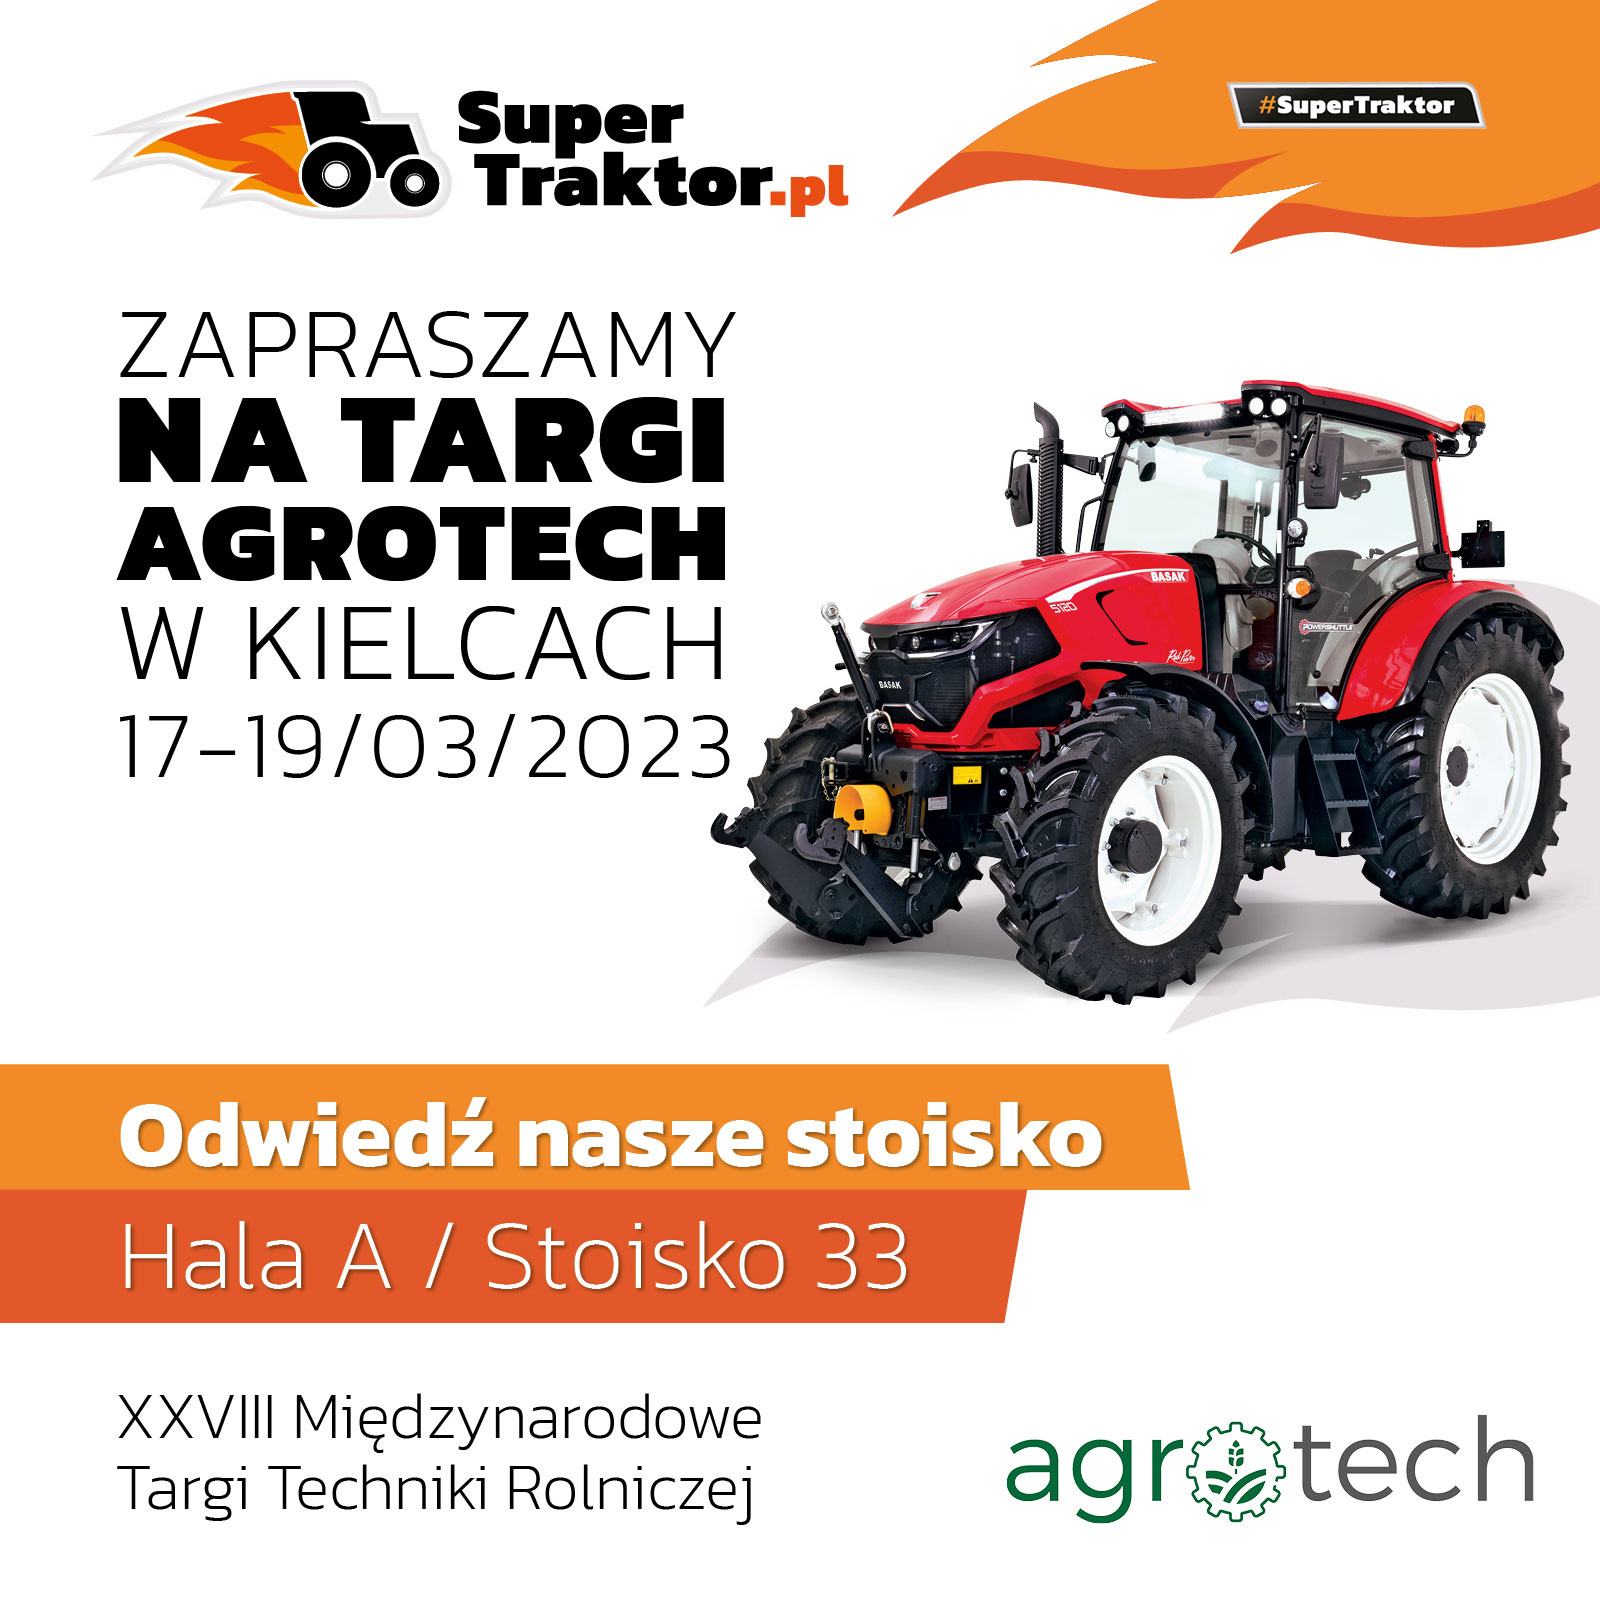 AgriTechnica Hannover 2019